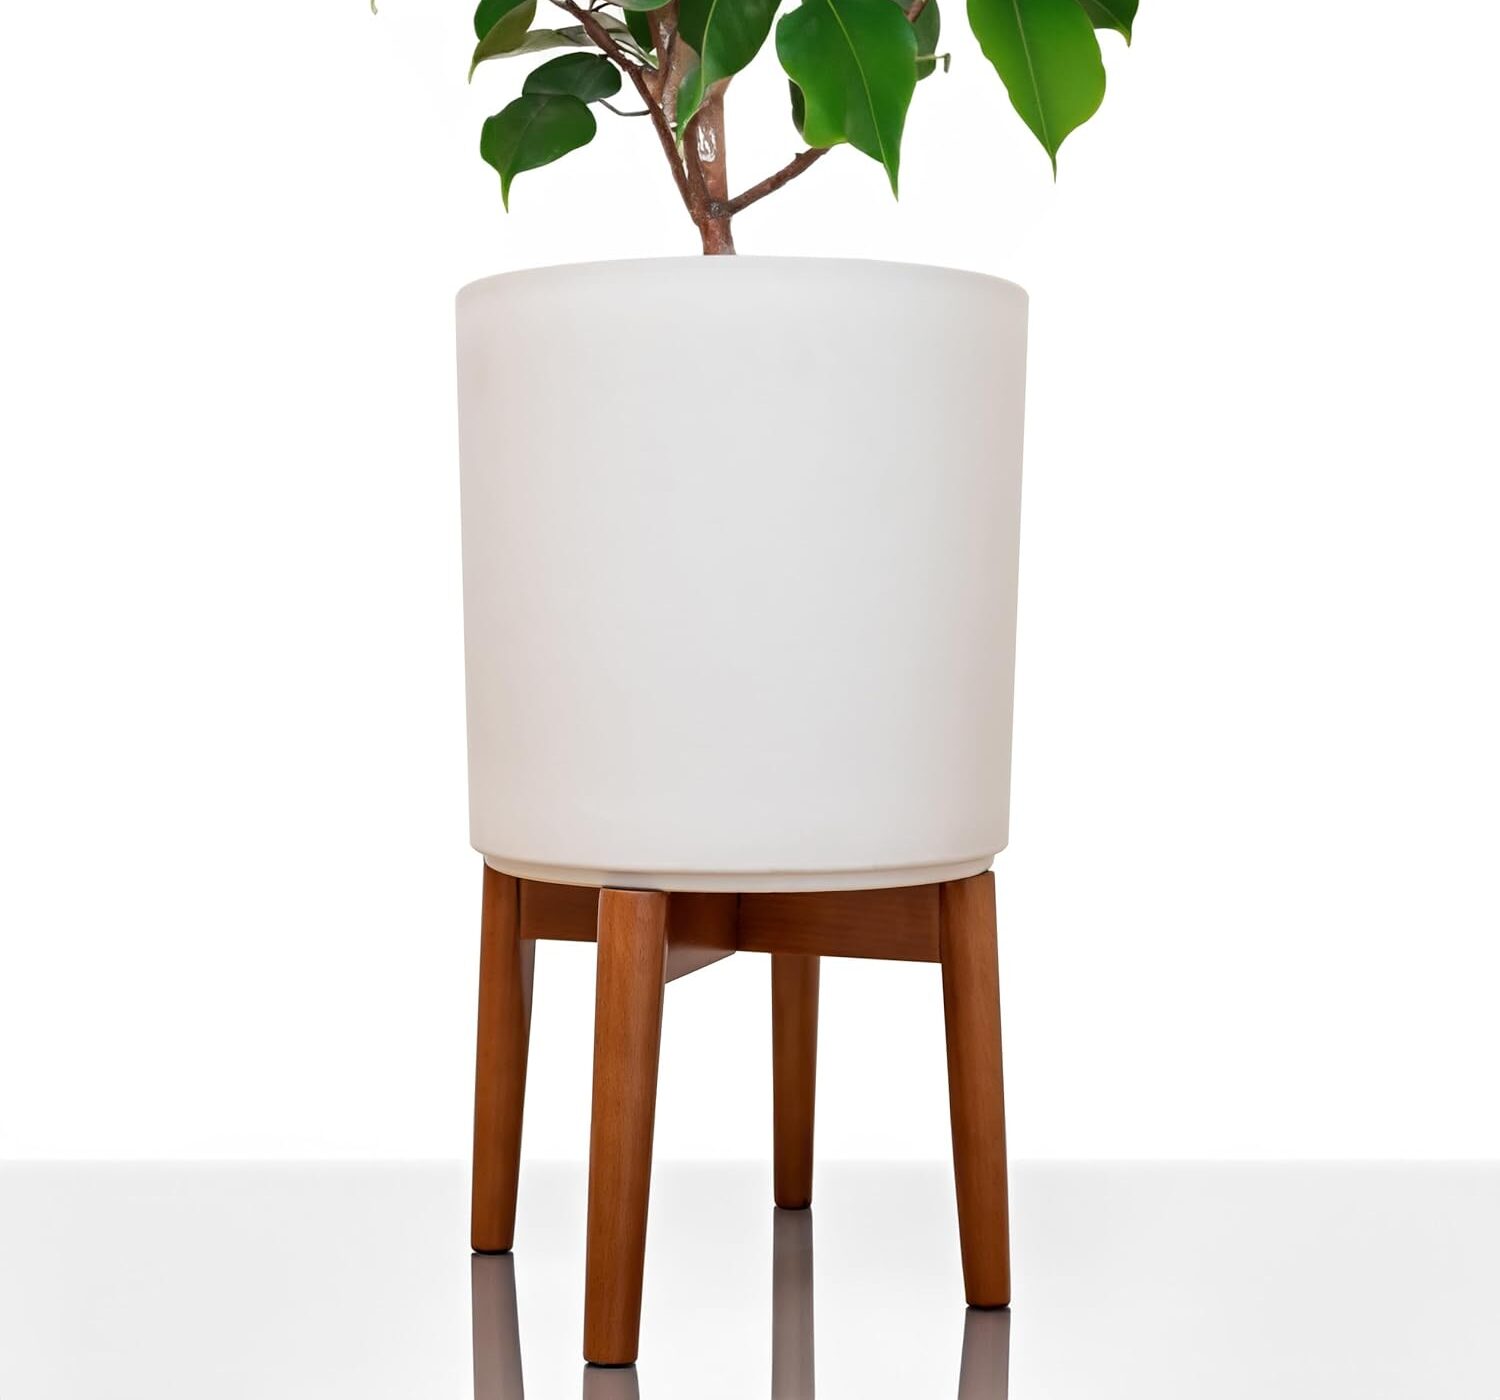 APOC HOME 10 Inch Planter Pot with Stand, Mid-Century Tall Plant Pot with Stand, Indoor Plants, Medium, White (White)